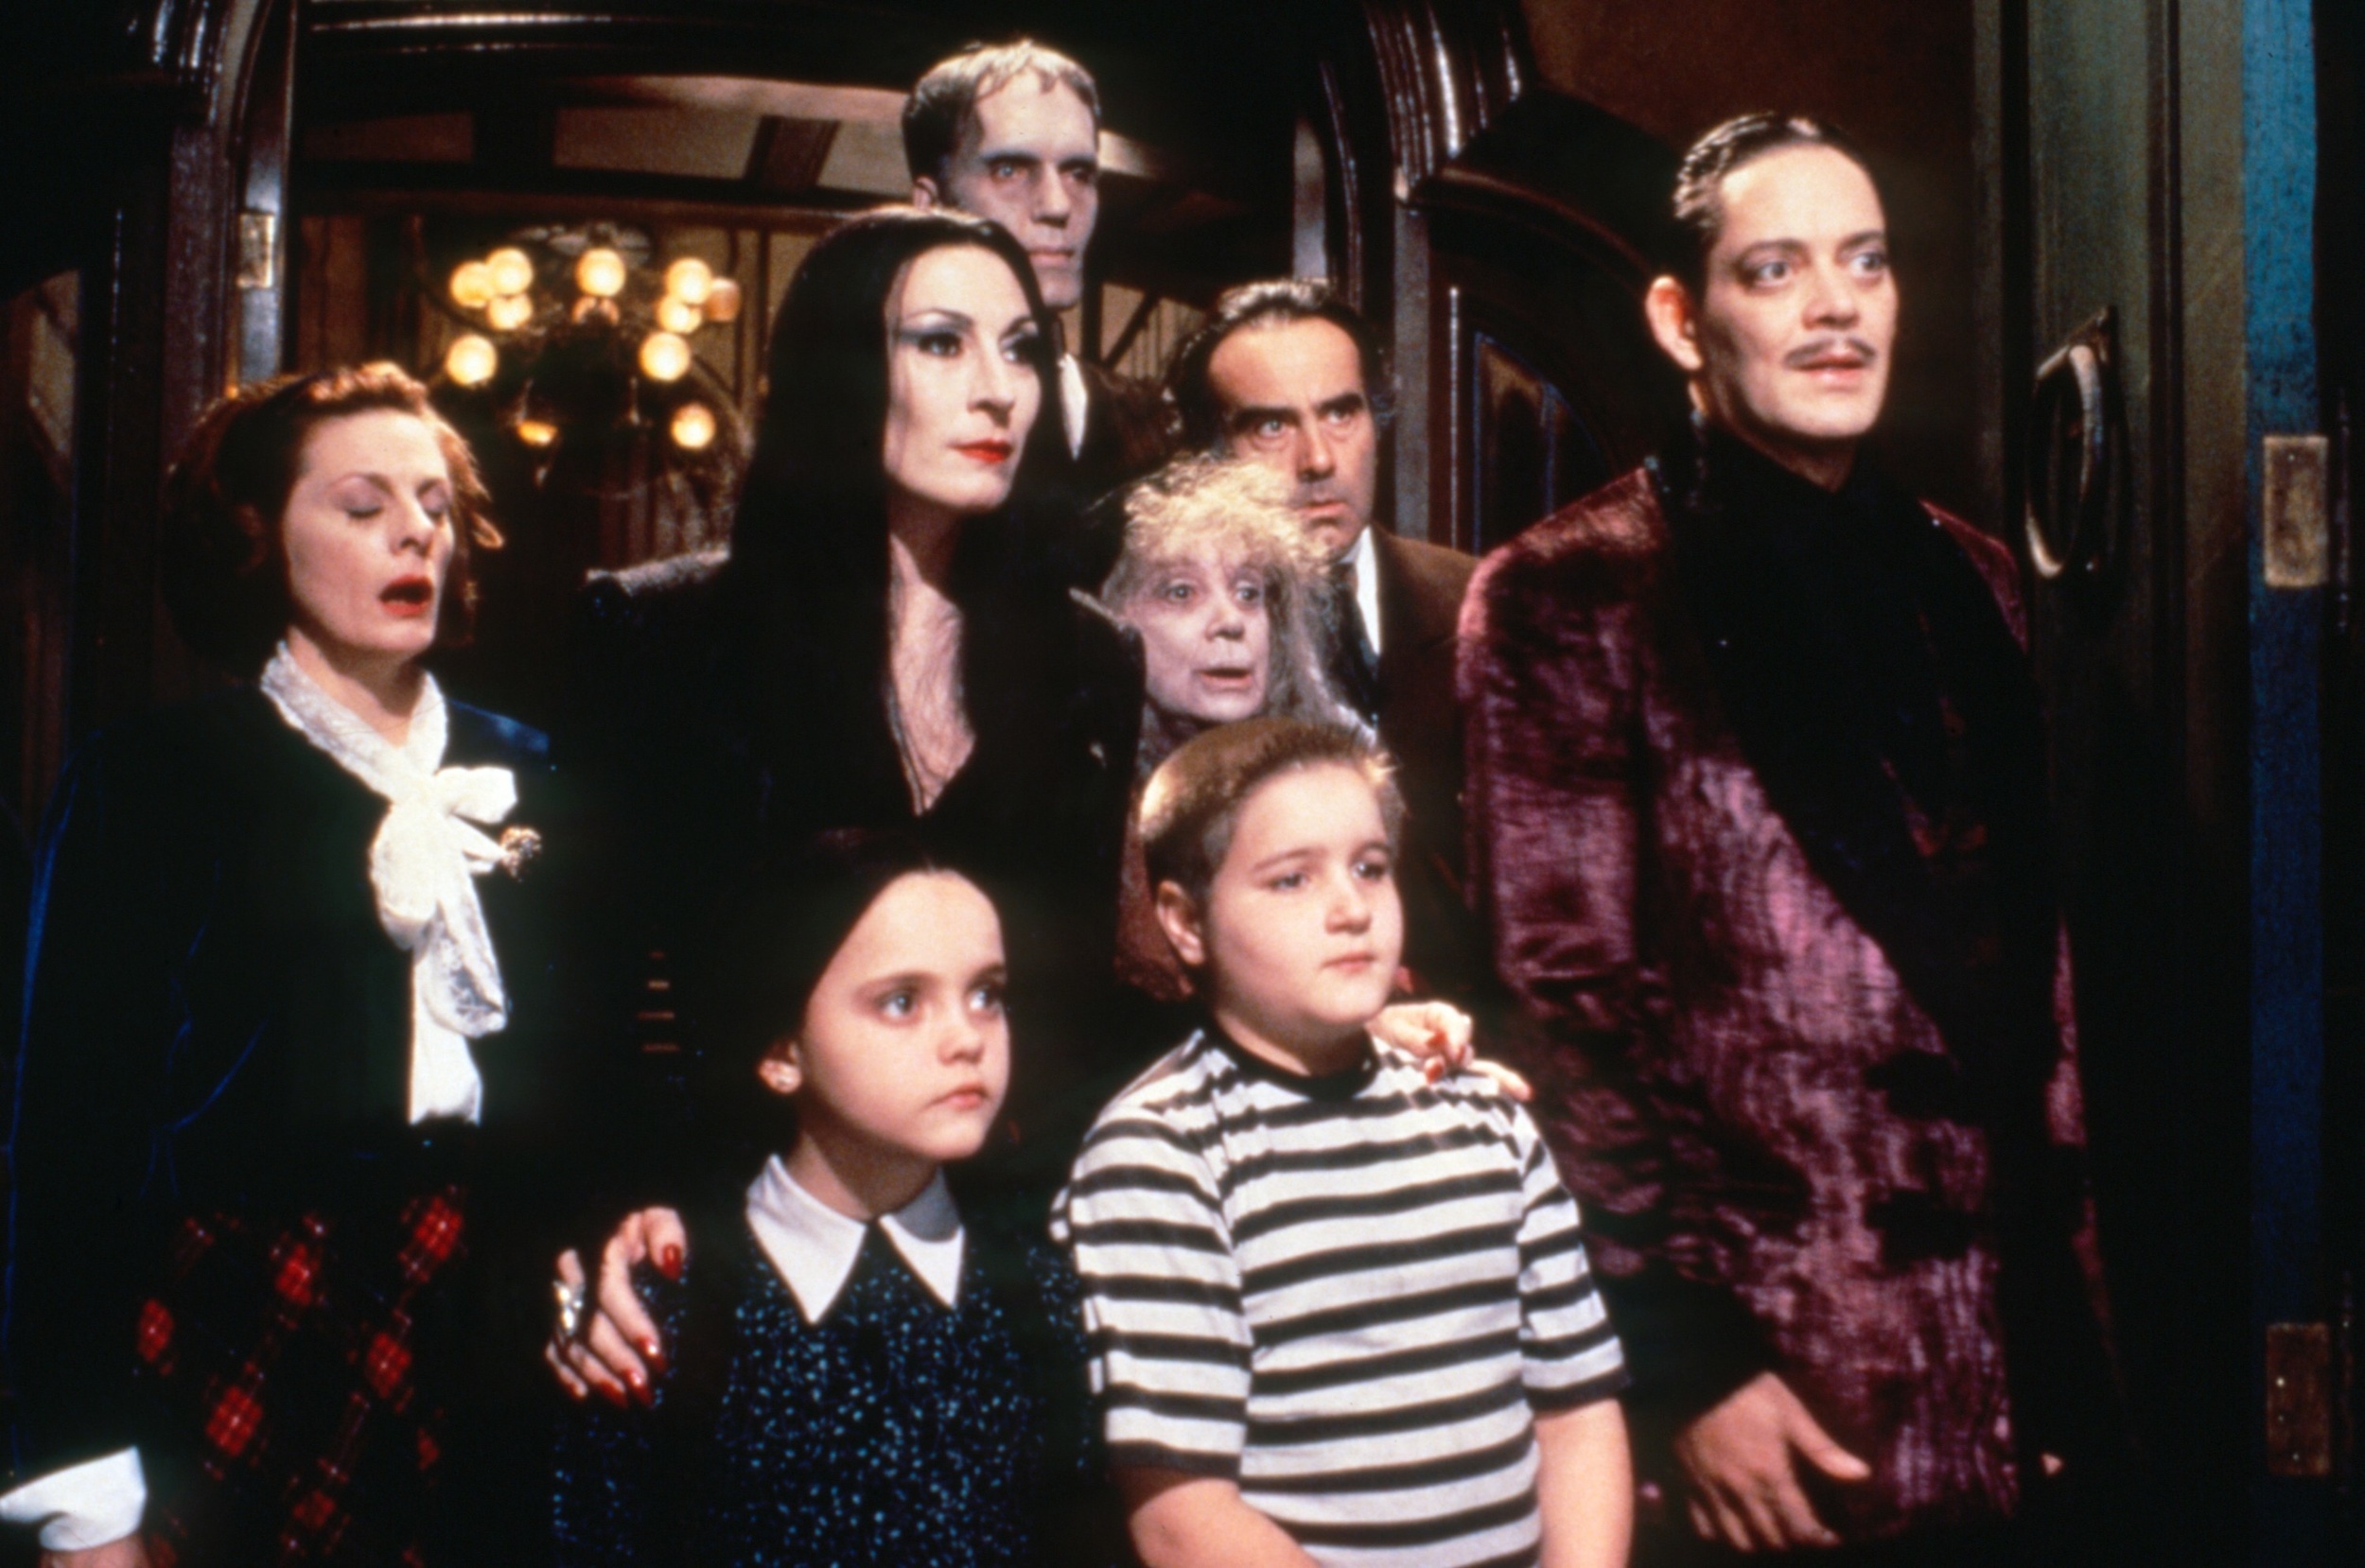 <p>Originally, Sonnenfeld didn’t want to reveal if the real Uncle Fester had returned, or if he was still an impostor. The actors were not fans of this decision. They deputized Christina Ricci – perhaps thinking Sonnenfeld might find it hard to say no to a little kid – to share their concern with the director. Sonnenfeld agreed to change the ending, and was ultimately happy with the decision.</p><p><a href='https://www.msn.com/en-us/community/channel/vid-cj9pqbr0vn9in2b6ddcd8sfgpfq6x6utp44fssrv6mc2gtybw0us'>Follow us on MSN to see more of our exclusive entertainment content.</a></p>